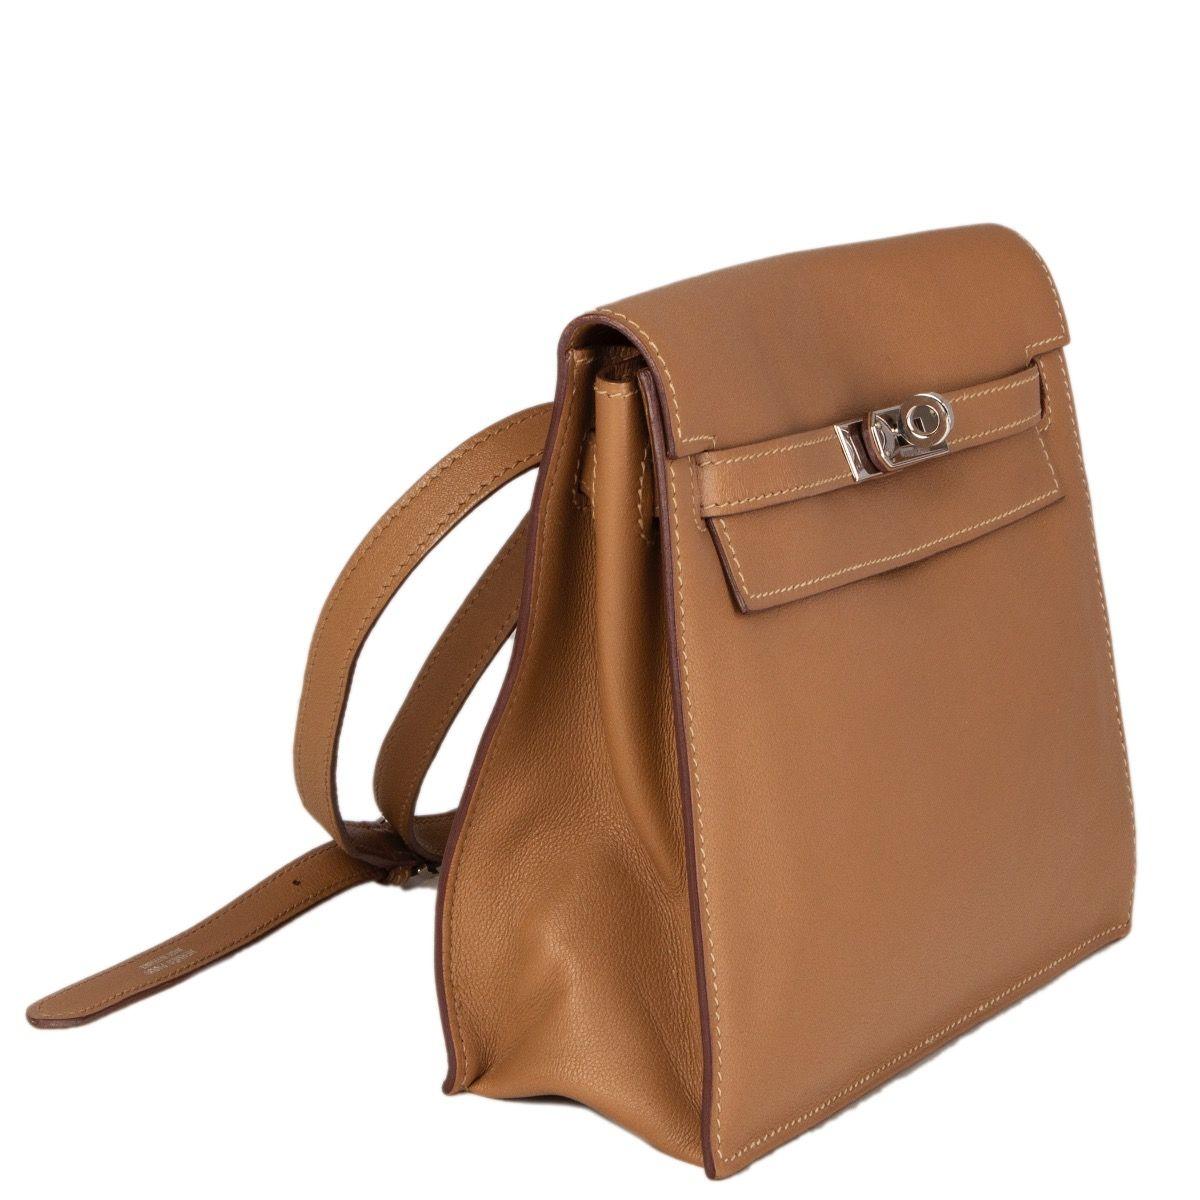 Hermès 'Kelly Danse' crossbody or belt bag in Biscuit (beige) Veau Swift leather. Opens with a Palladium Kelly-Buckle. Lined in Veau swift leather with one open pocket against the back. Comes with a adjustable shoulder strap. Has been carried and is